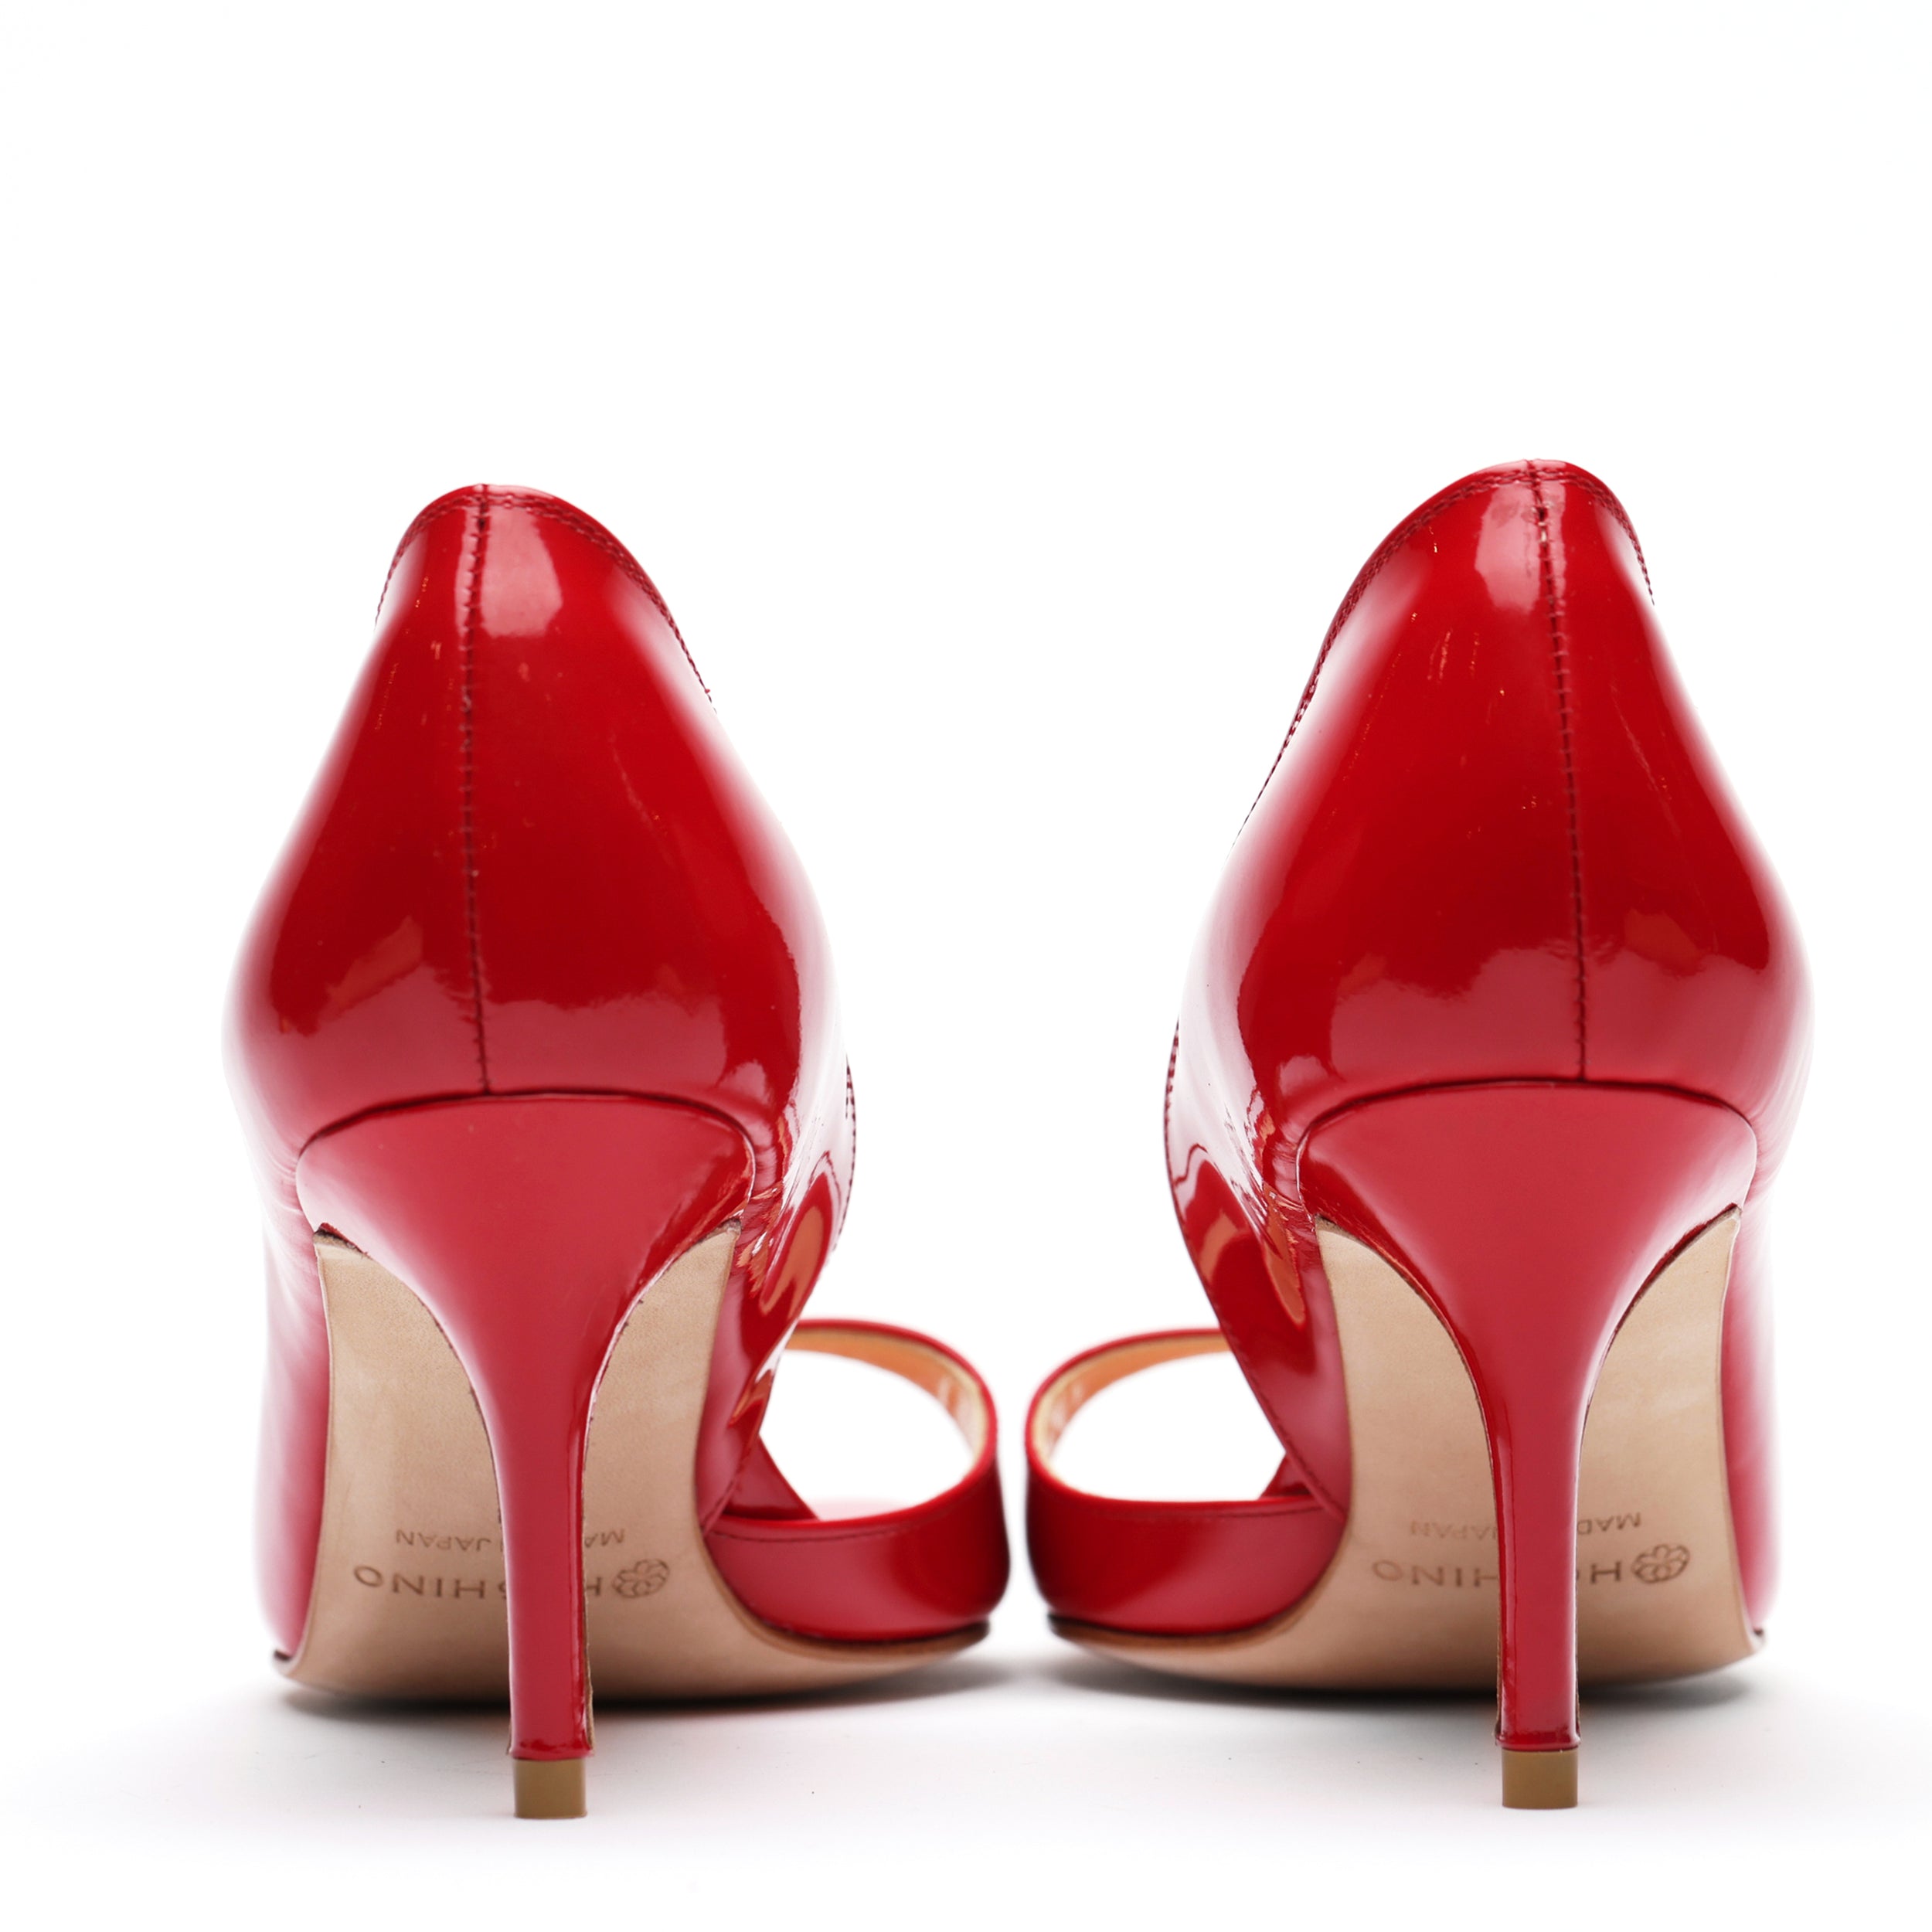 [women's] reunion - d'Orsay sandals - red patent leather